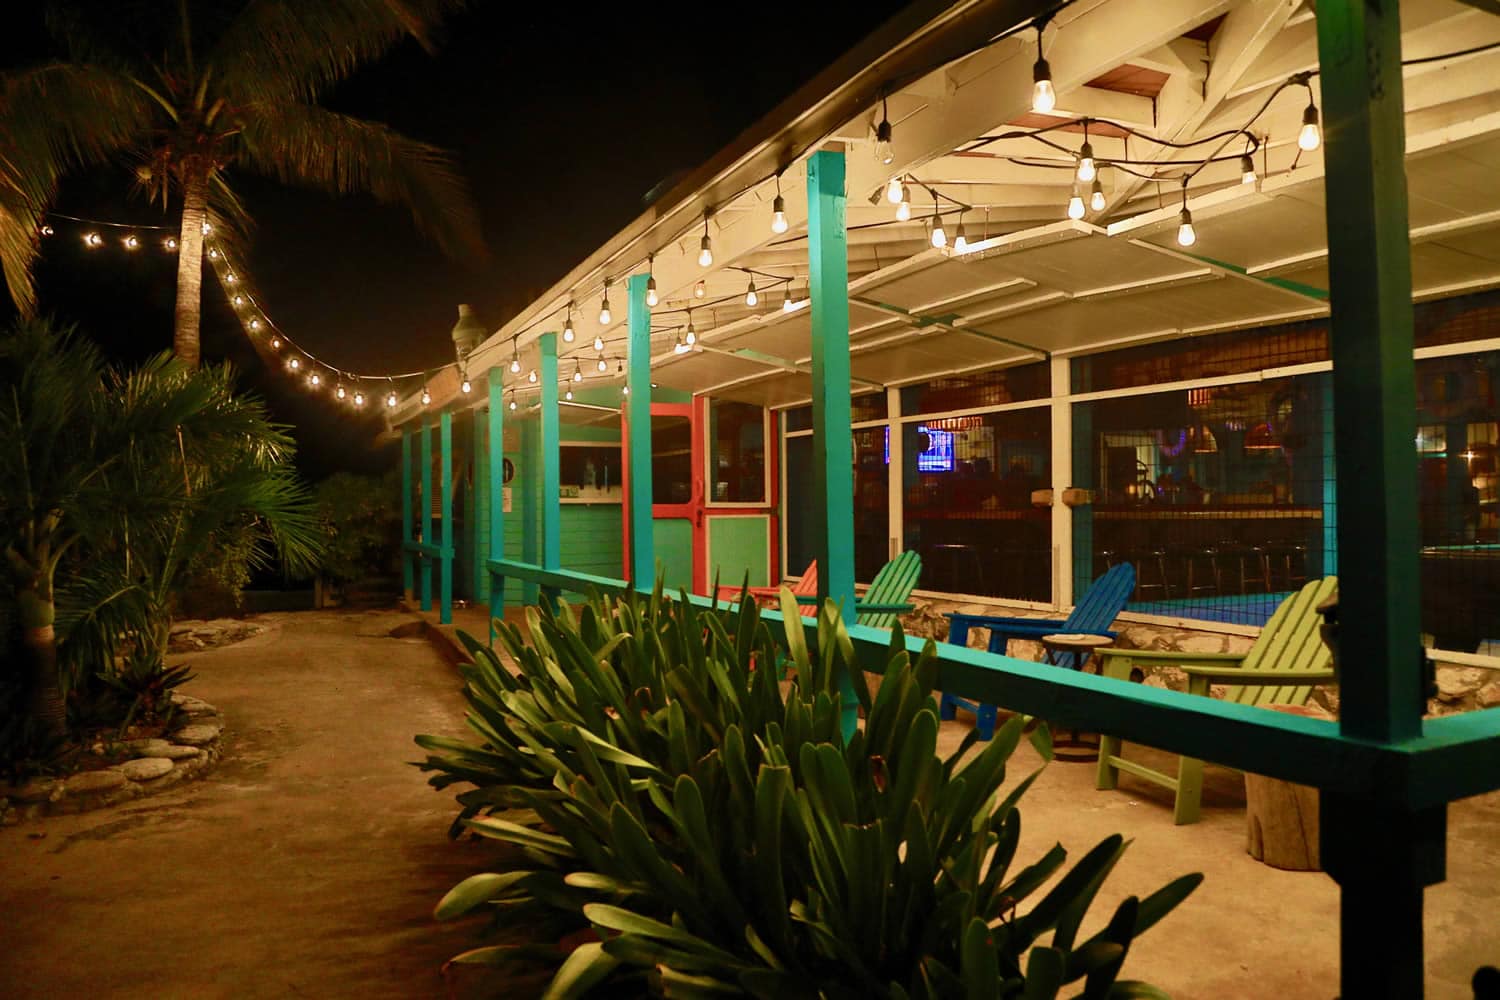 A patio at night with palm trees and string lights in Staniel Cay.